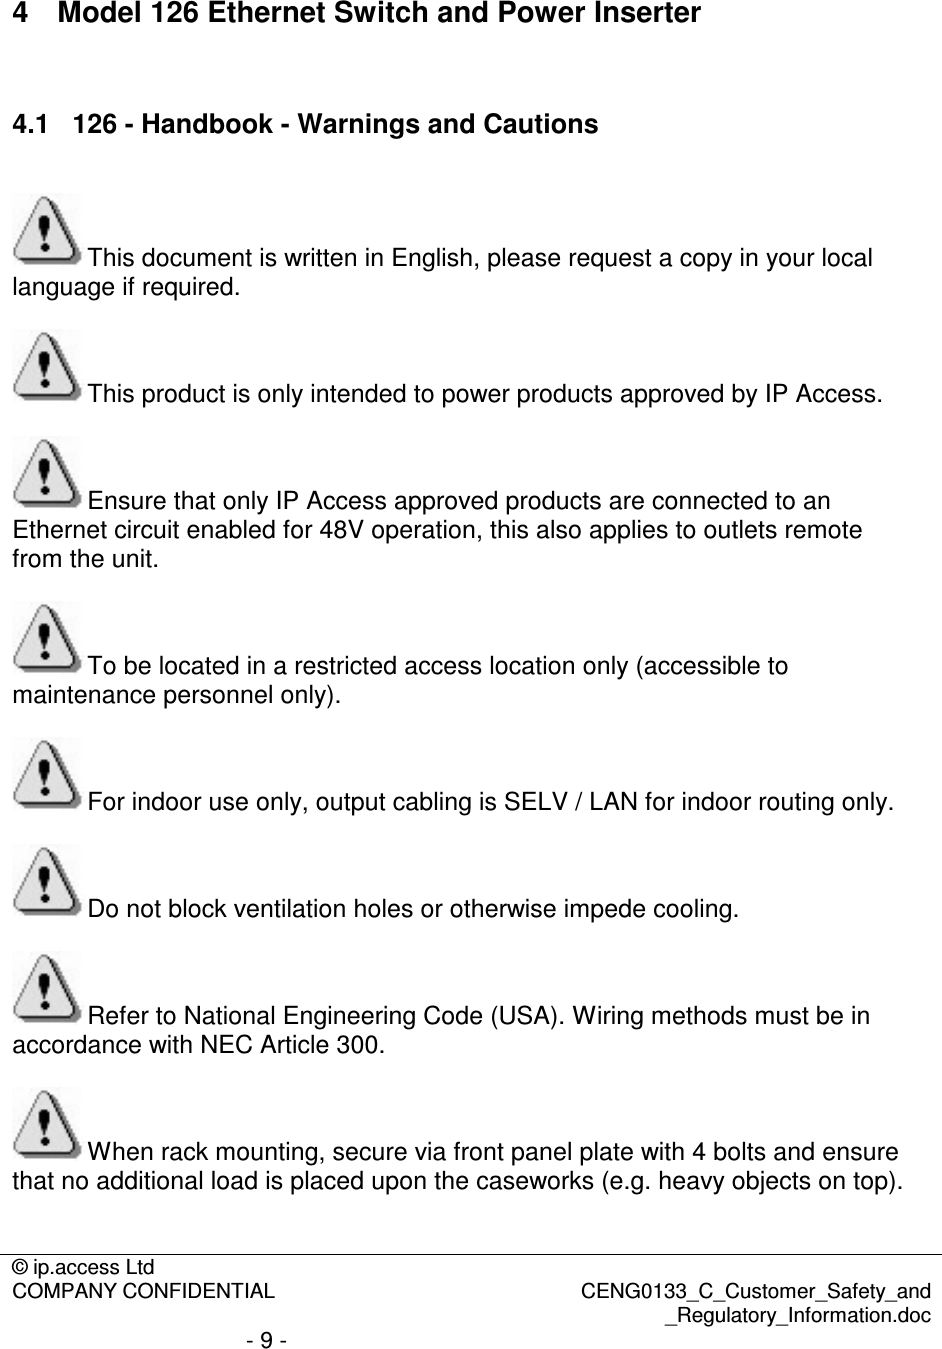 © ip.access Ltd  COMPANY CONFIDENTIAL  CENG0133_C_Customer_Safety_and _Regulatory_Information.doc - 9 -   4  Model 126 Ethernet Switch and Power Inserter  4.1  126 - Handbook - Warnings and Cautions  This document is written in English, please request a copy in your local language if required.  This product is only intended to power products approved by IP Access.  Ensure that only IP Access approved products are connected to an Ethernet circuit enabled for 48V operation, this also applies to outlets remote from the unit.  To be located in a restricted access location only (accessible to maintenance personnel only).  For indoor use only, output cabling is SELV / LAN for indoor routing only.  Do not block ventilation holes or otherwise impede cooling.  Refer to National Engineering Code (USA). Wiring methods must be in accordance with NEC Article 300.  When rack mounting, secure via front panel plate with 4 bolts and ensure that no additional load is placed upon the caseworks (e.g. heavy objects on top).  